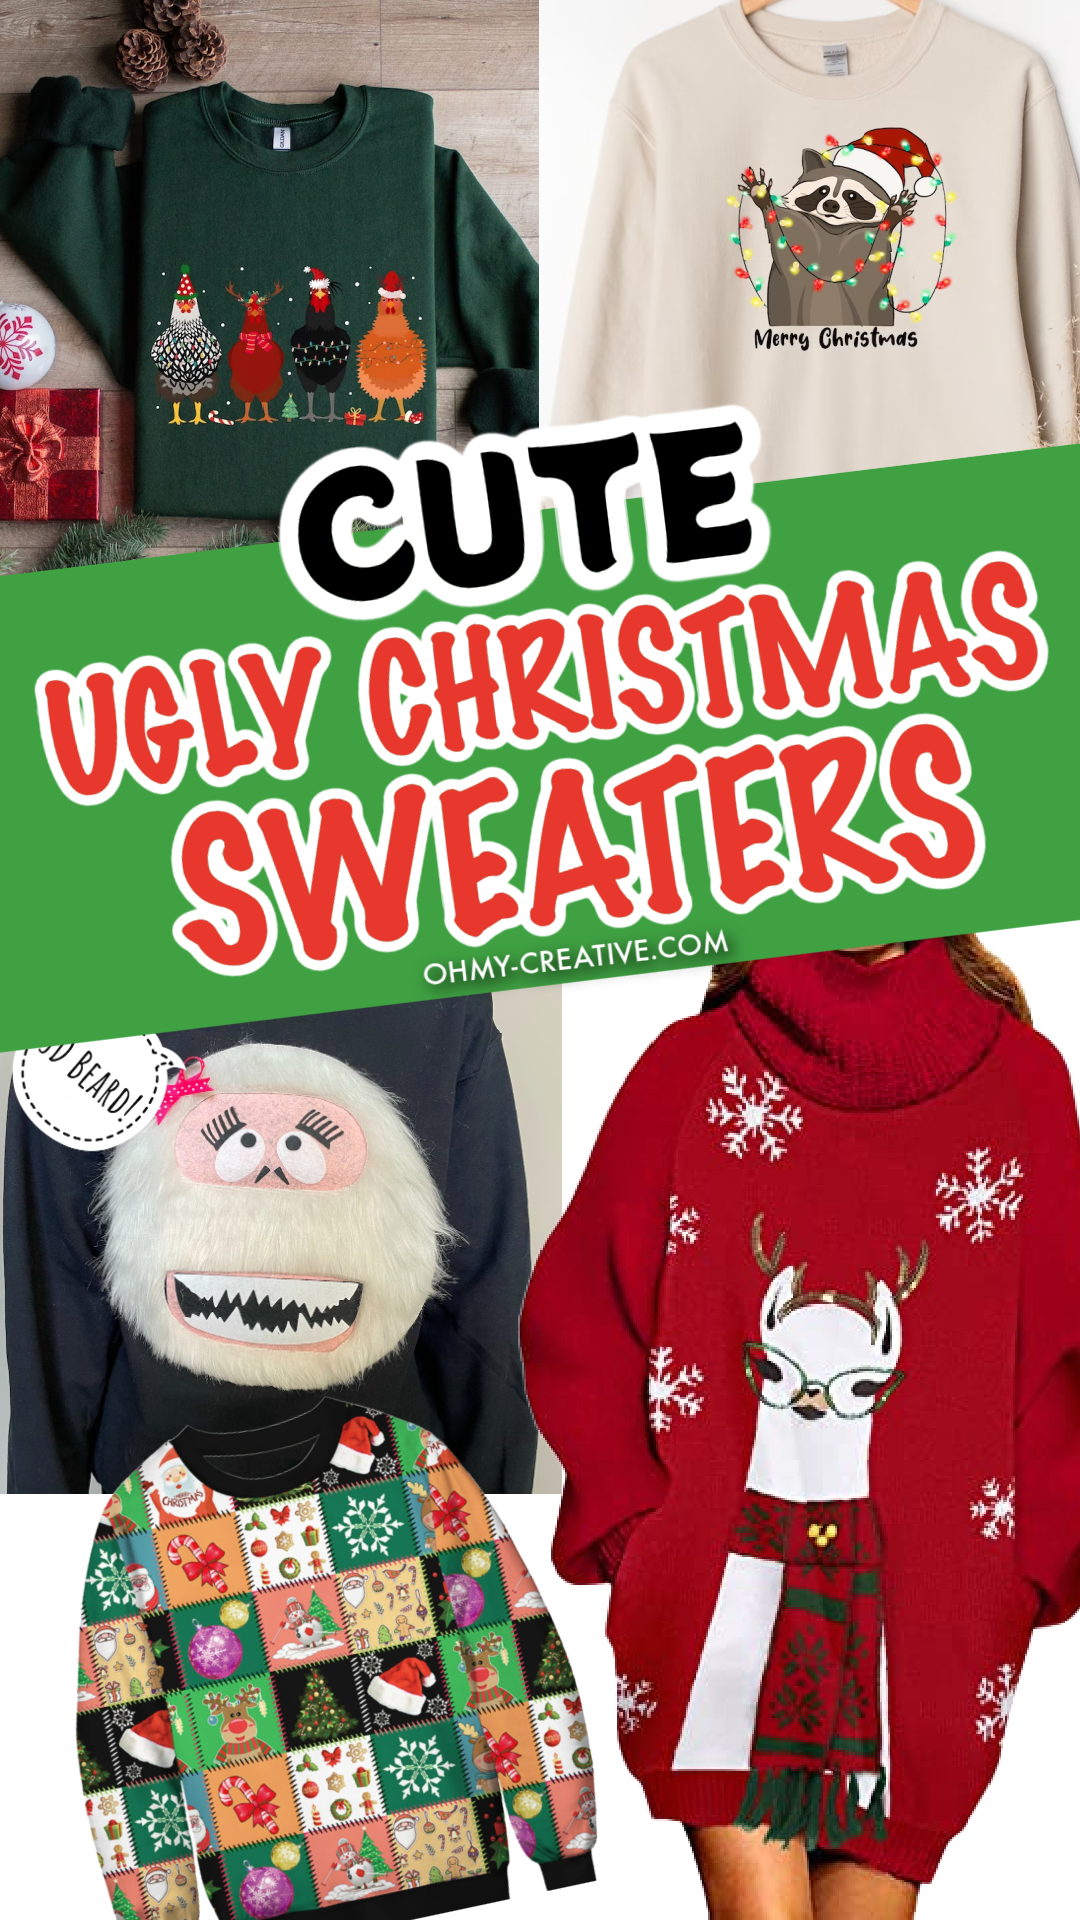 A collage of cute ugly Christmas sweaters for holiday parties or ugly Christmas Sweater parties.